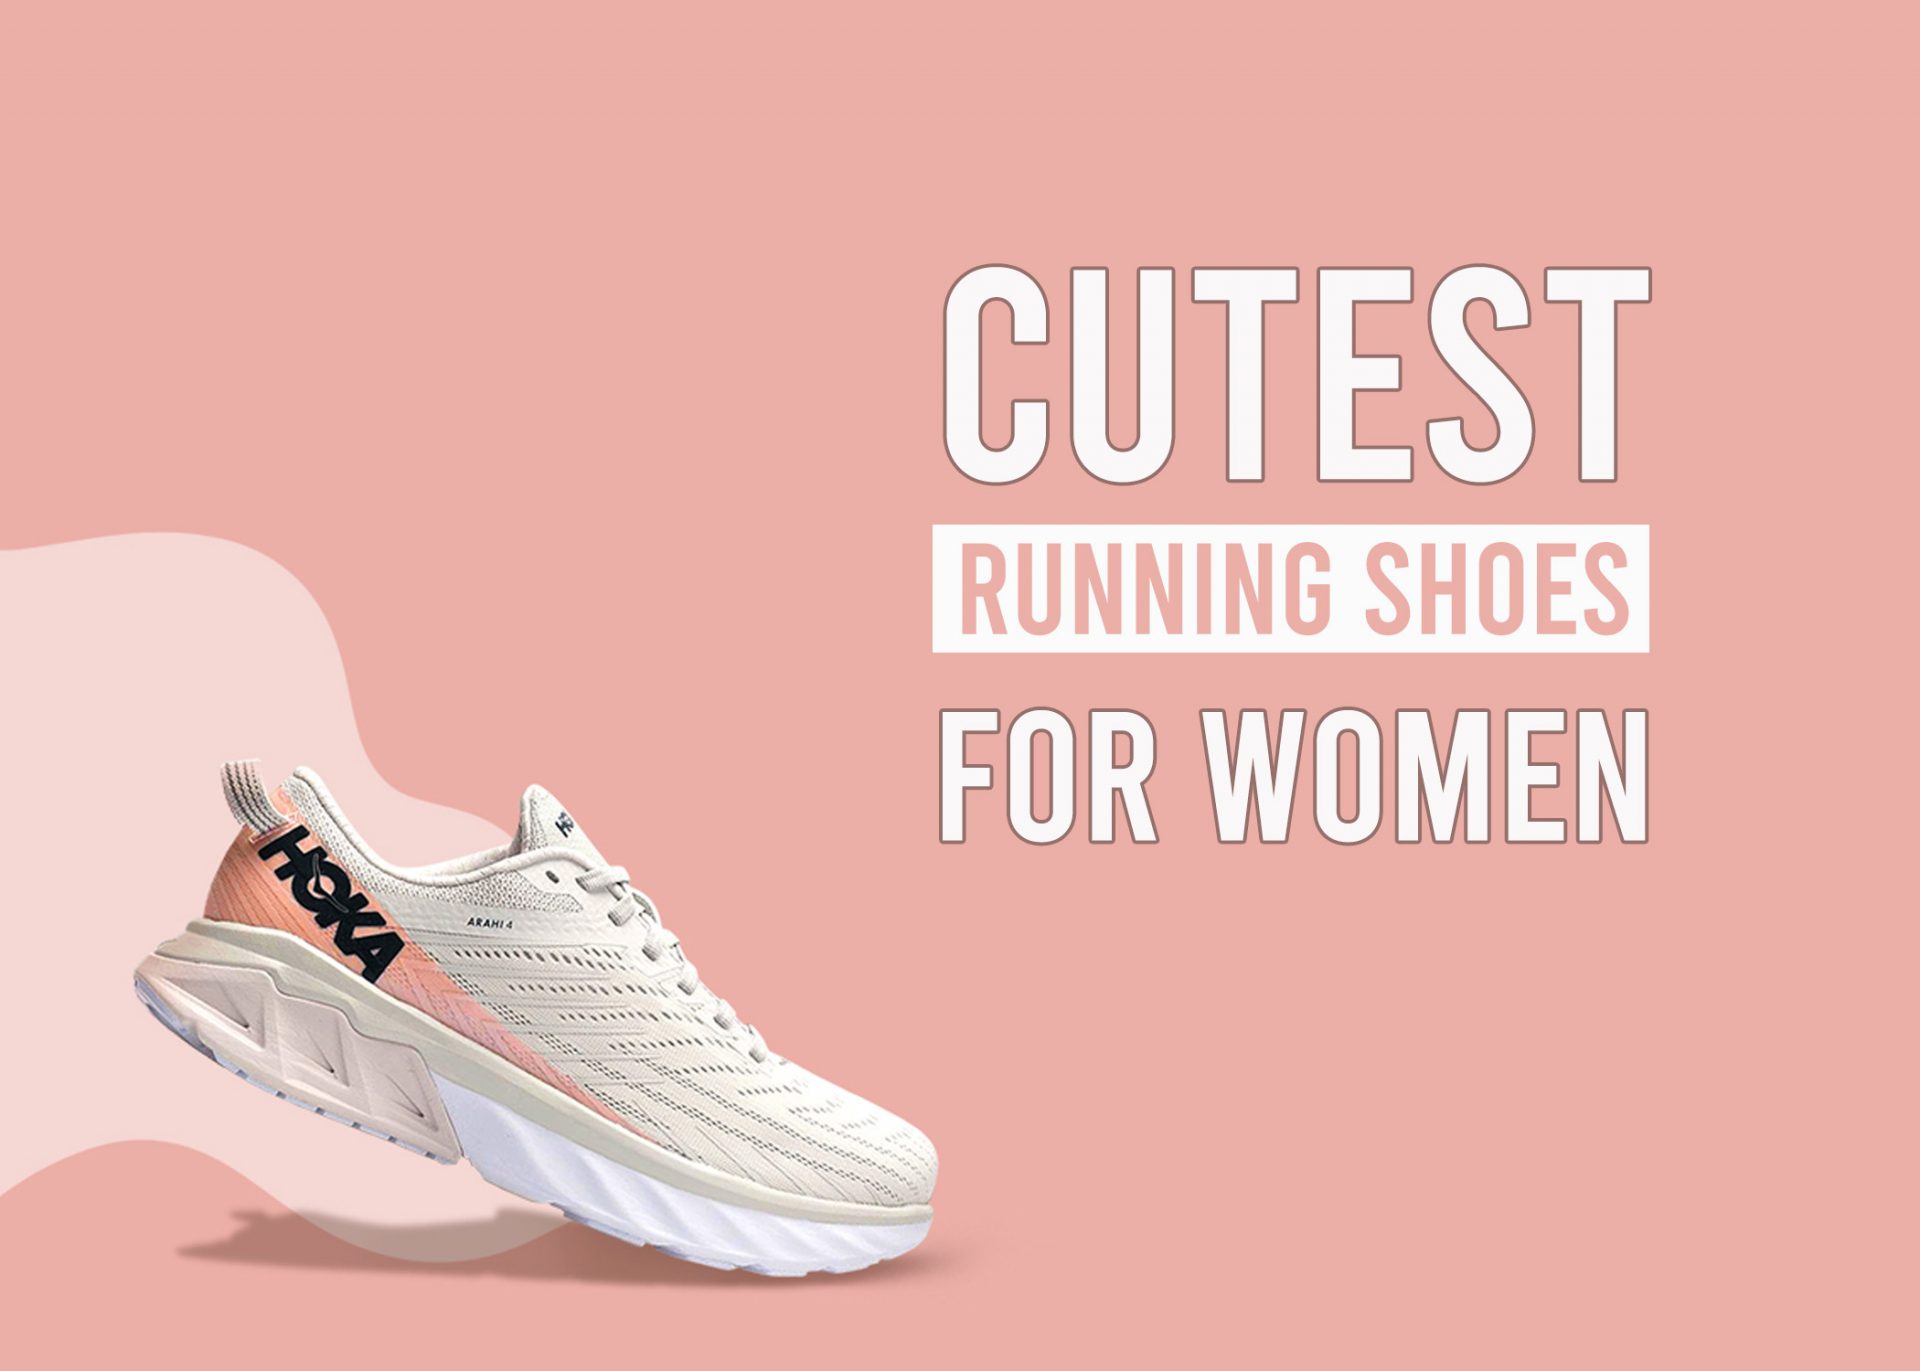 Cutest Running Shoes For Women's